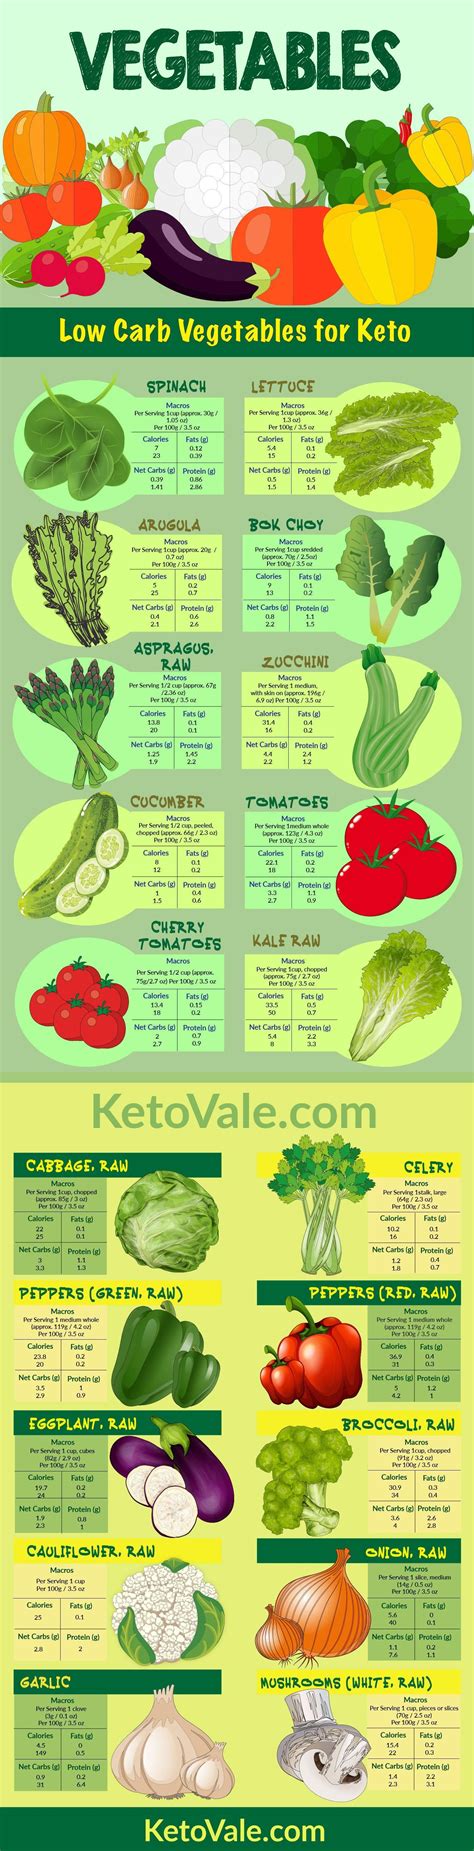 Keto Diet Food List Ultimate Low Carb Grocery Shopping Guide Pdf